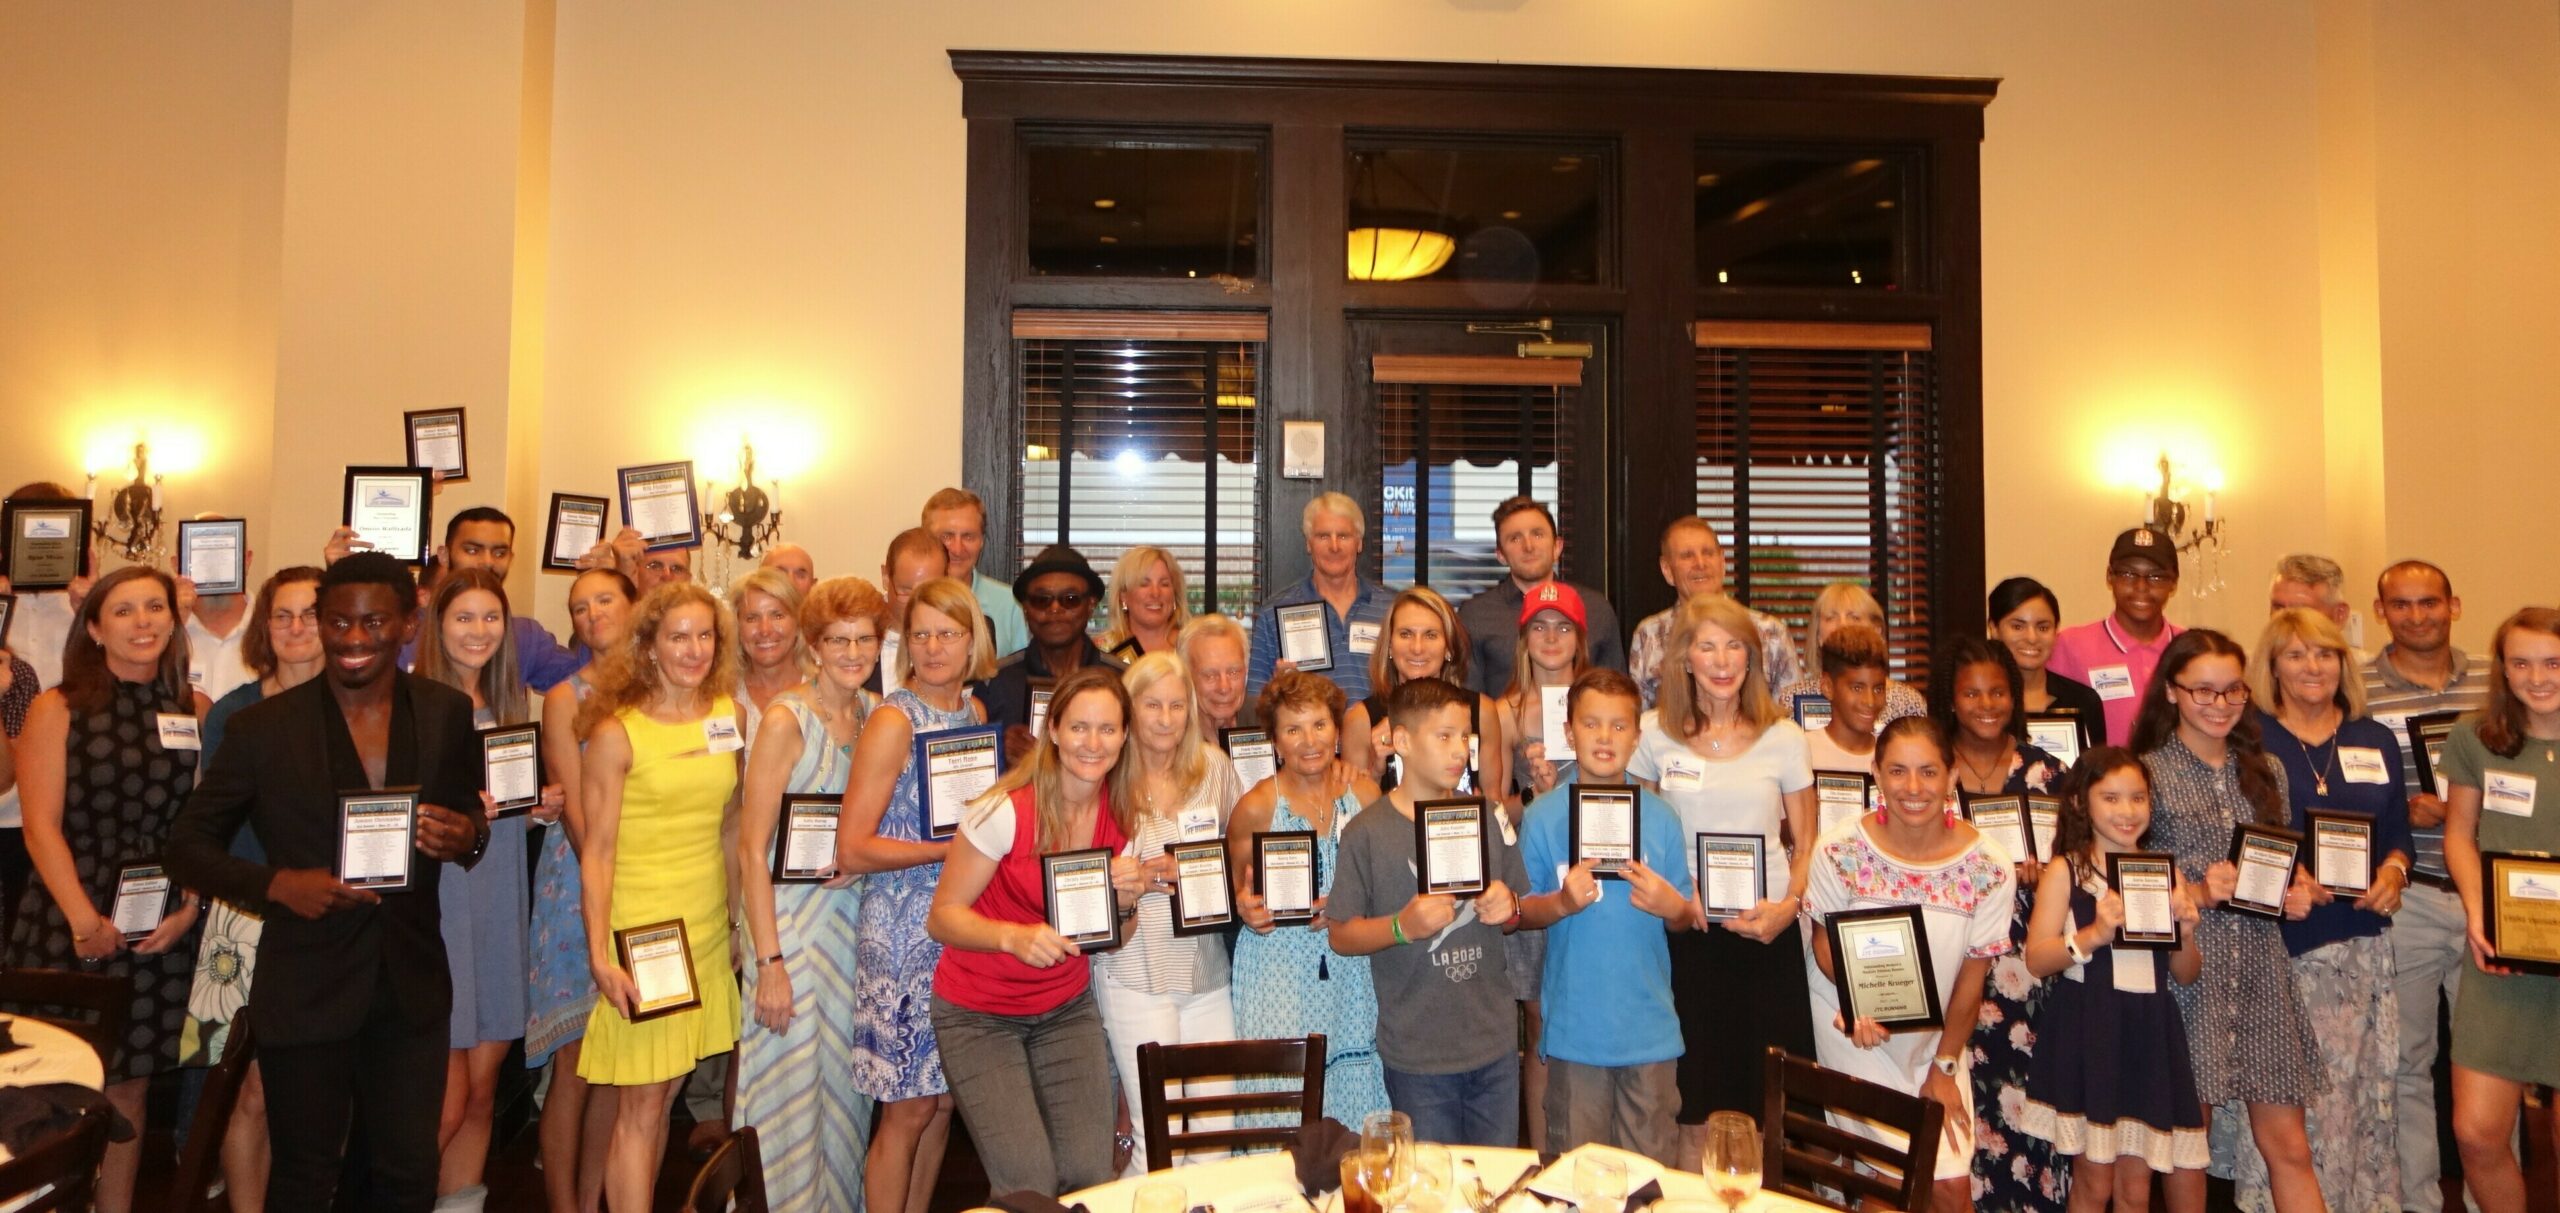 Winners Announced at JTC Running’s 35th Annual Banquet